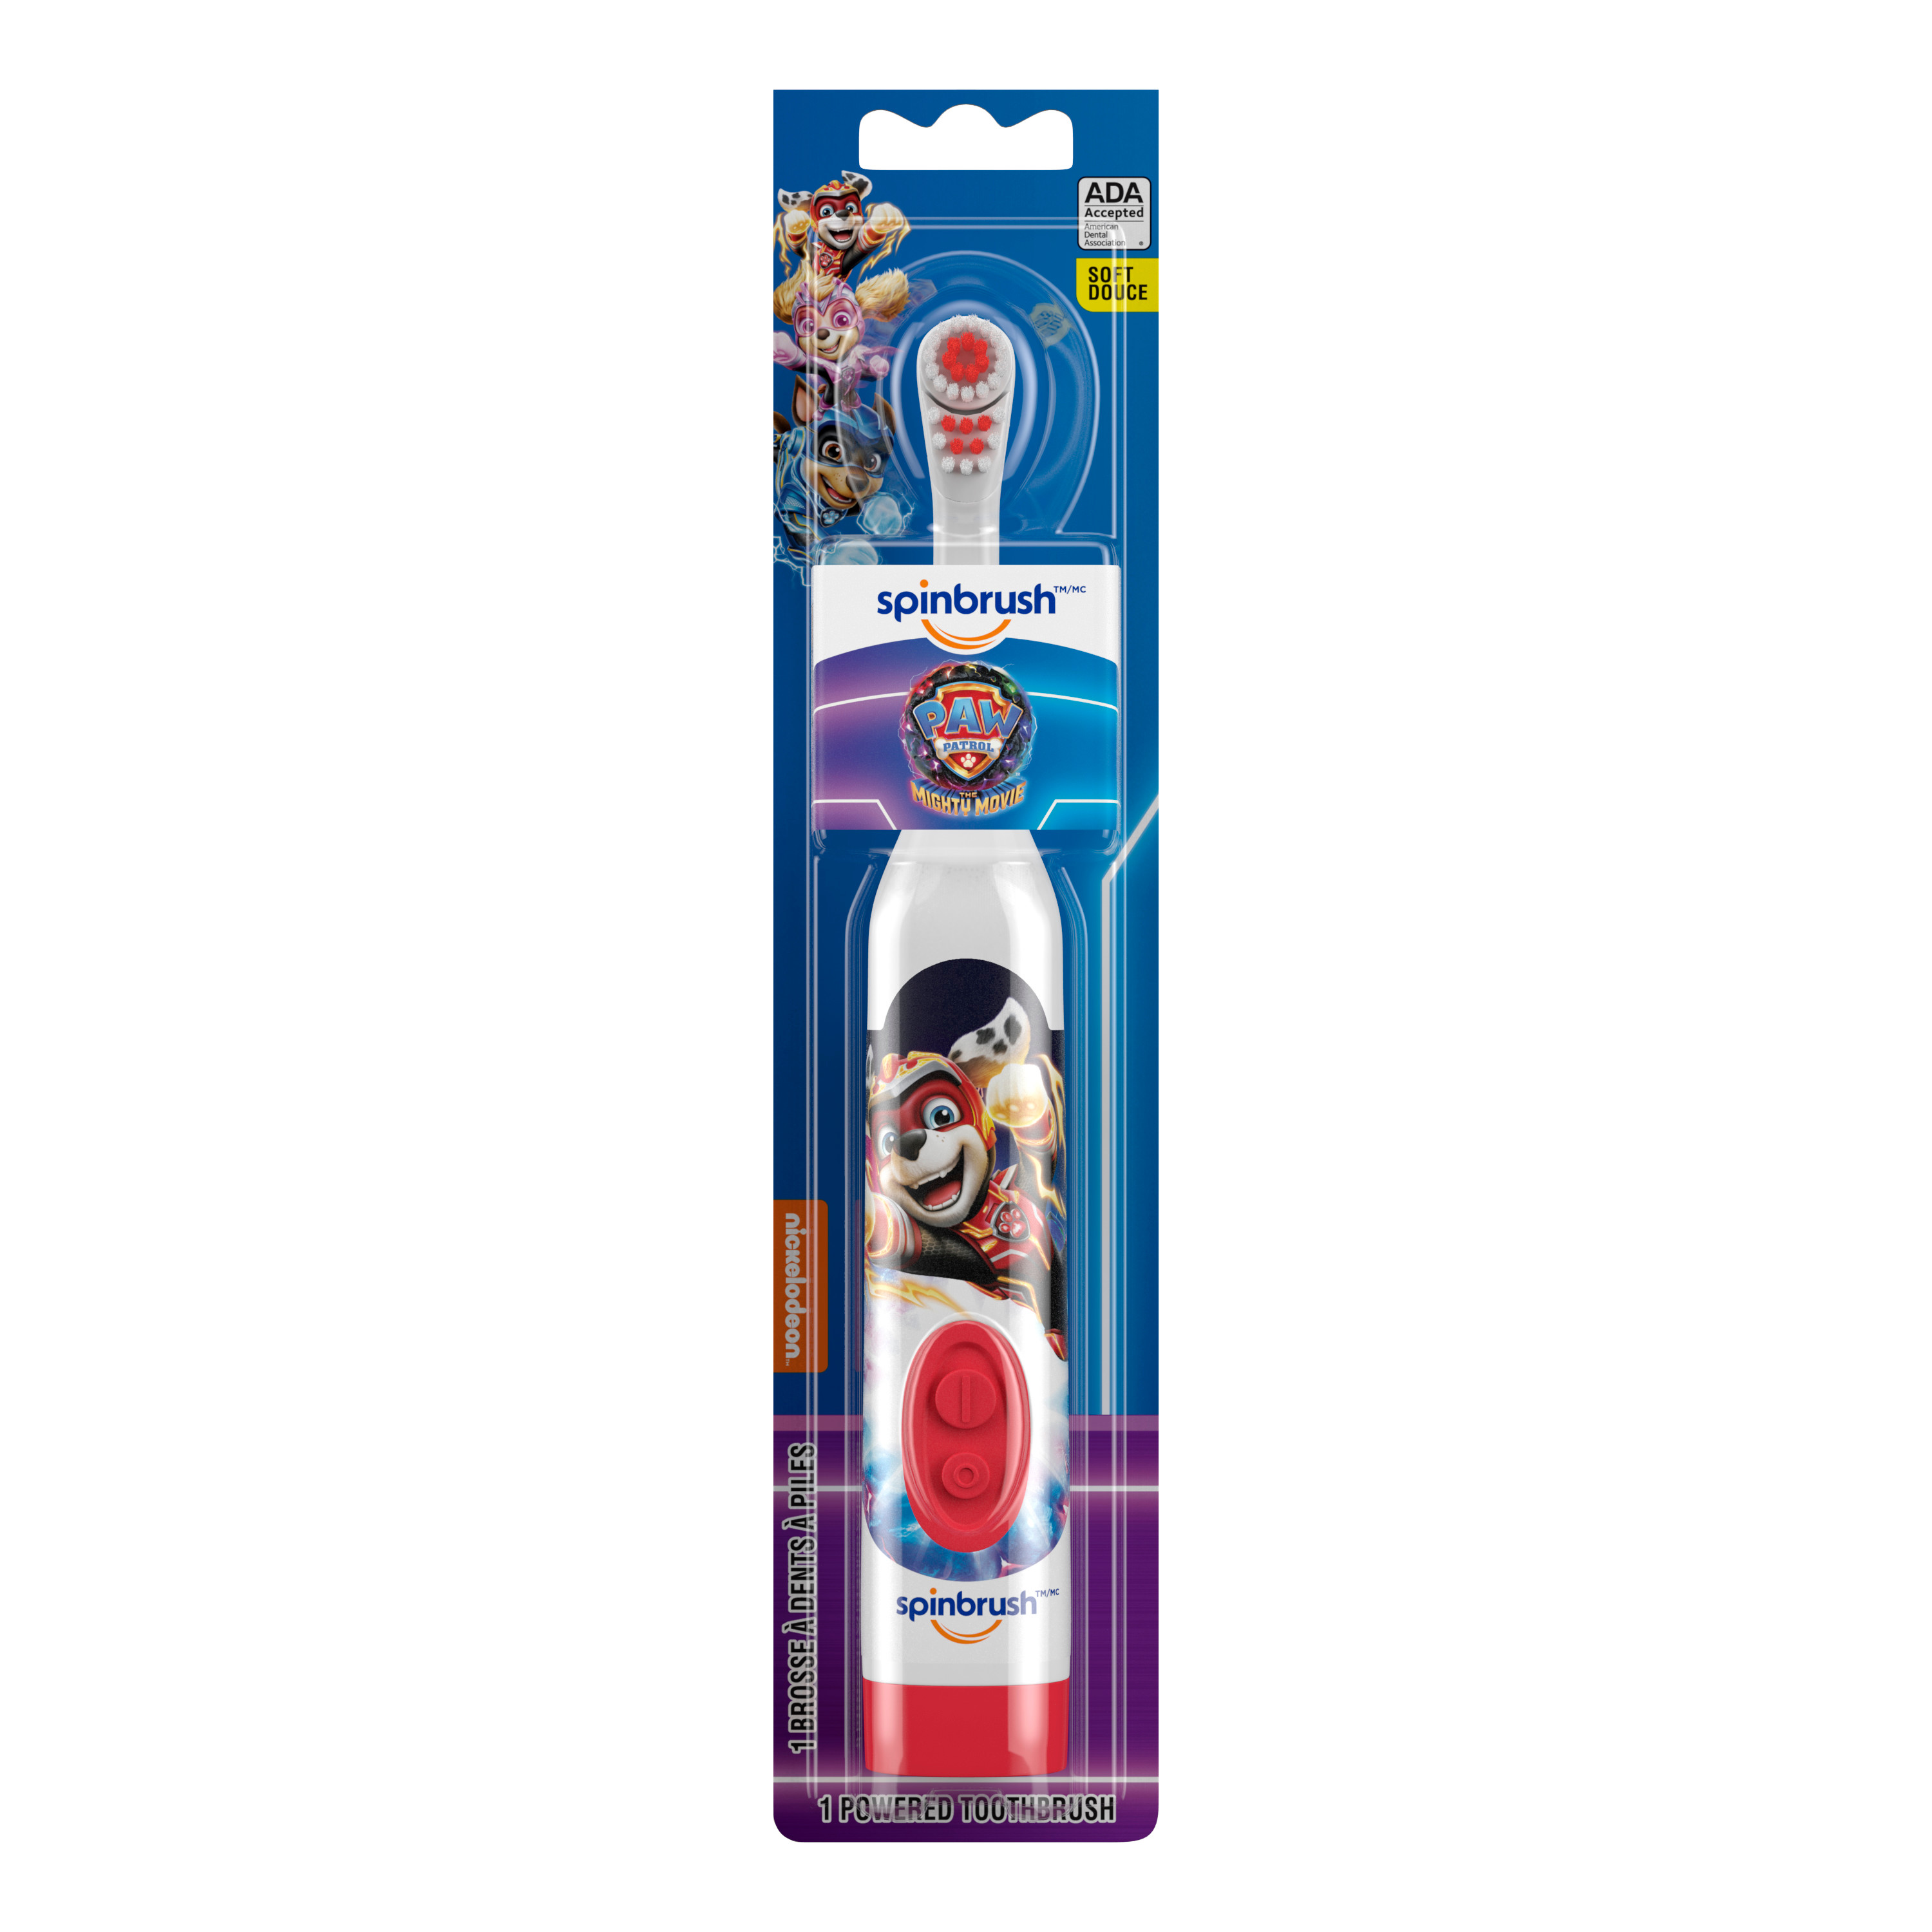 PAW Patrol Spinbrush Kids Battery-Powered Toothbrush, Soft Bristles, Ages 3+, Character May Vary - image 5 of 7